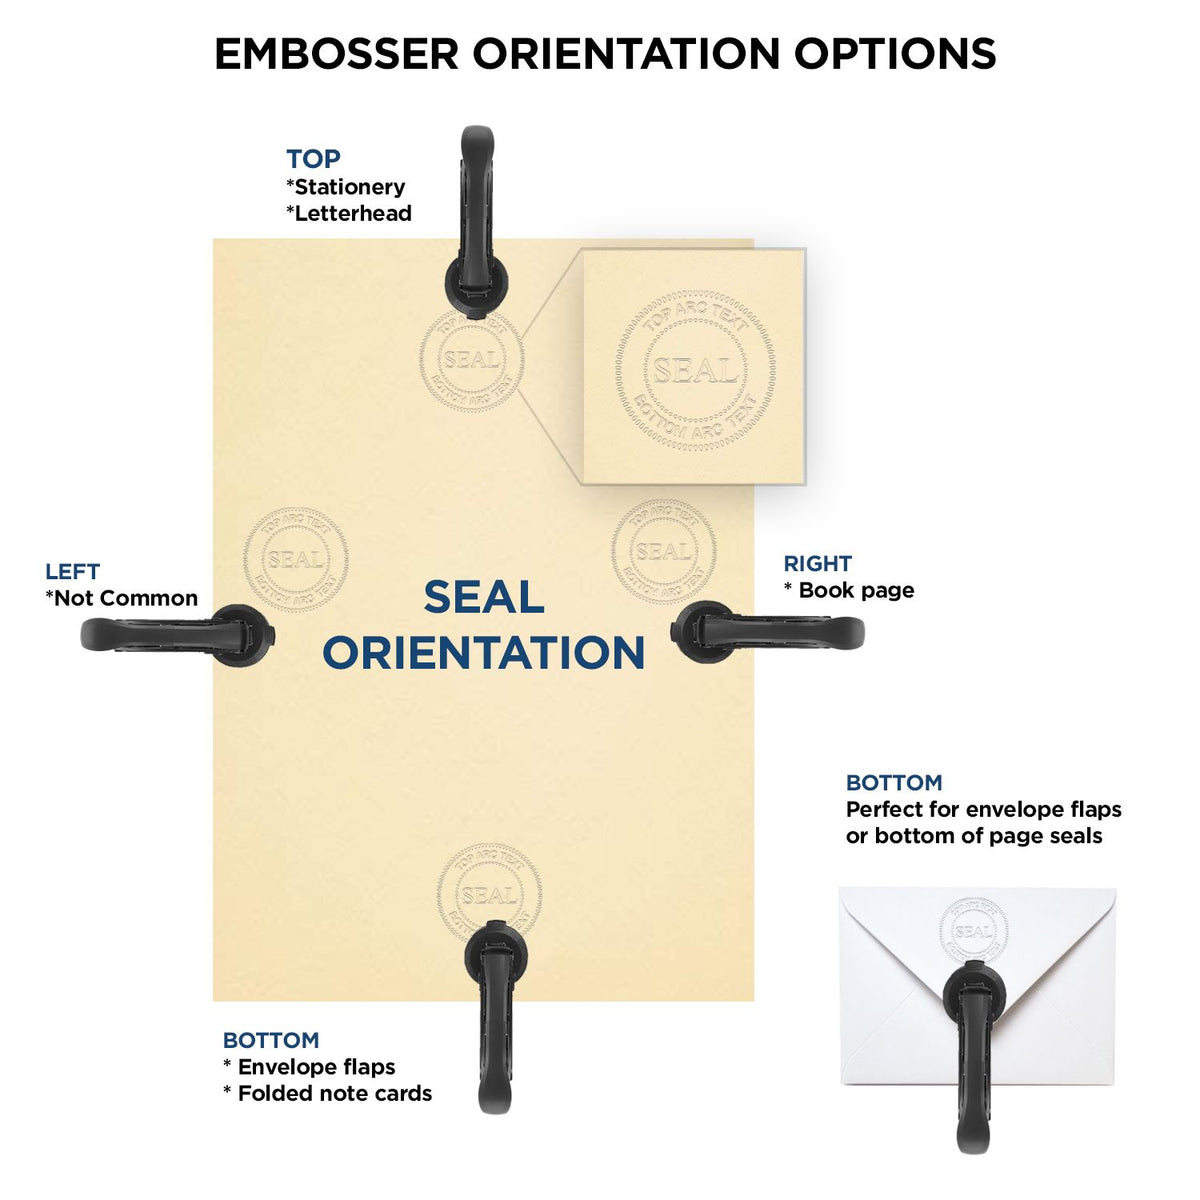 An infographic for the Handheld Iowa Professional Engineer Embosser showing embosser orientation, this is showing examples of a top, bottom, right and left insert.